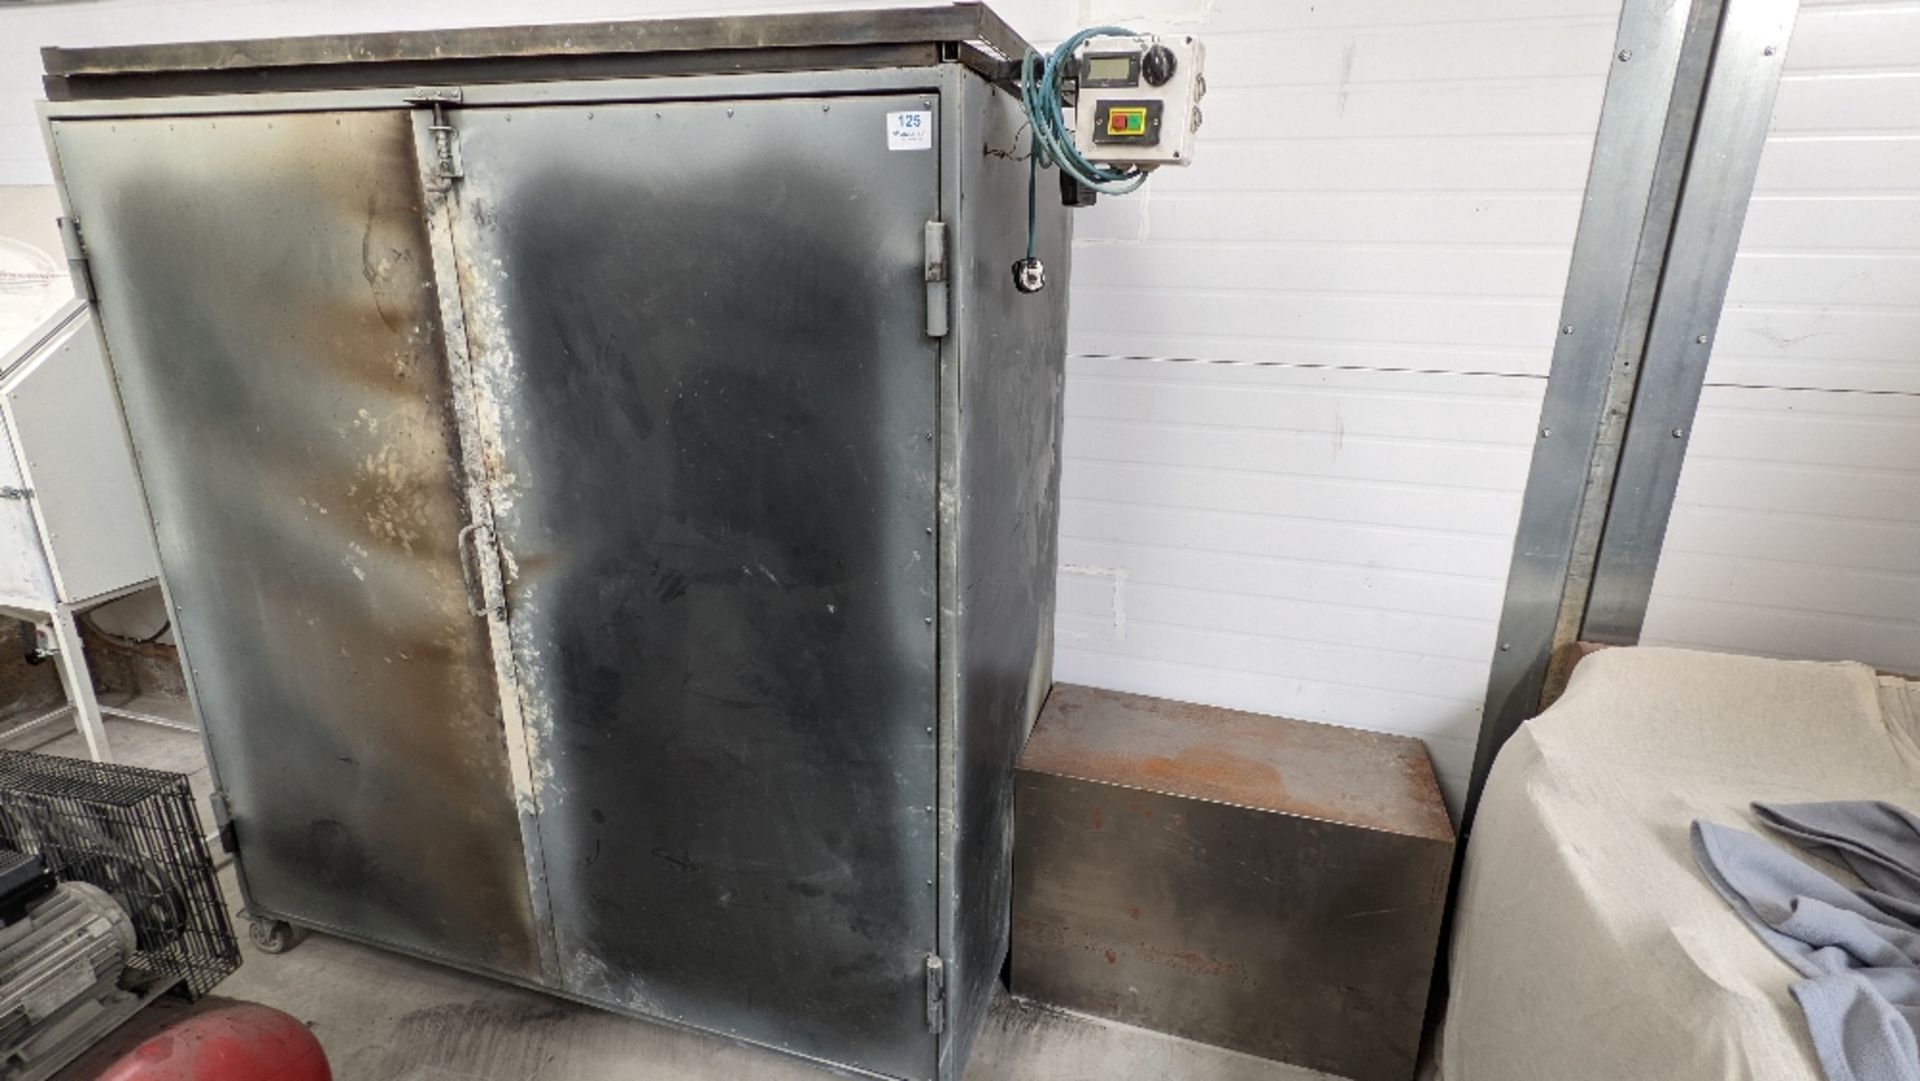 Mobile Paint Oven With Clarke XR 110 Space Heater - Image 6 of 9